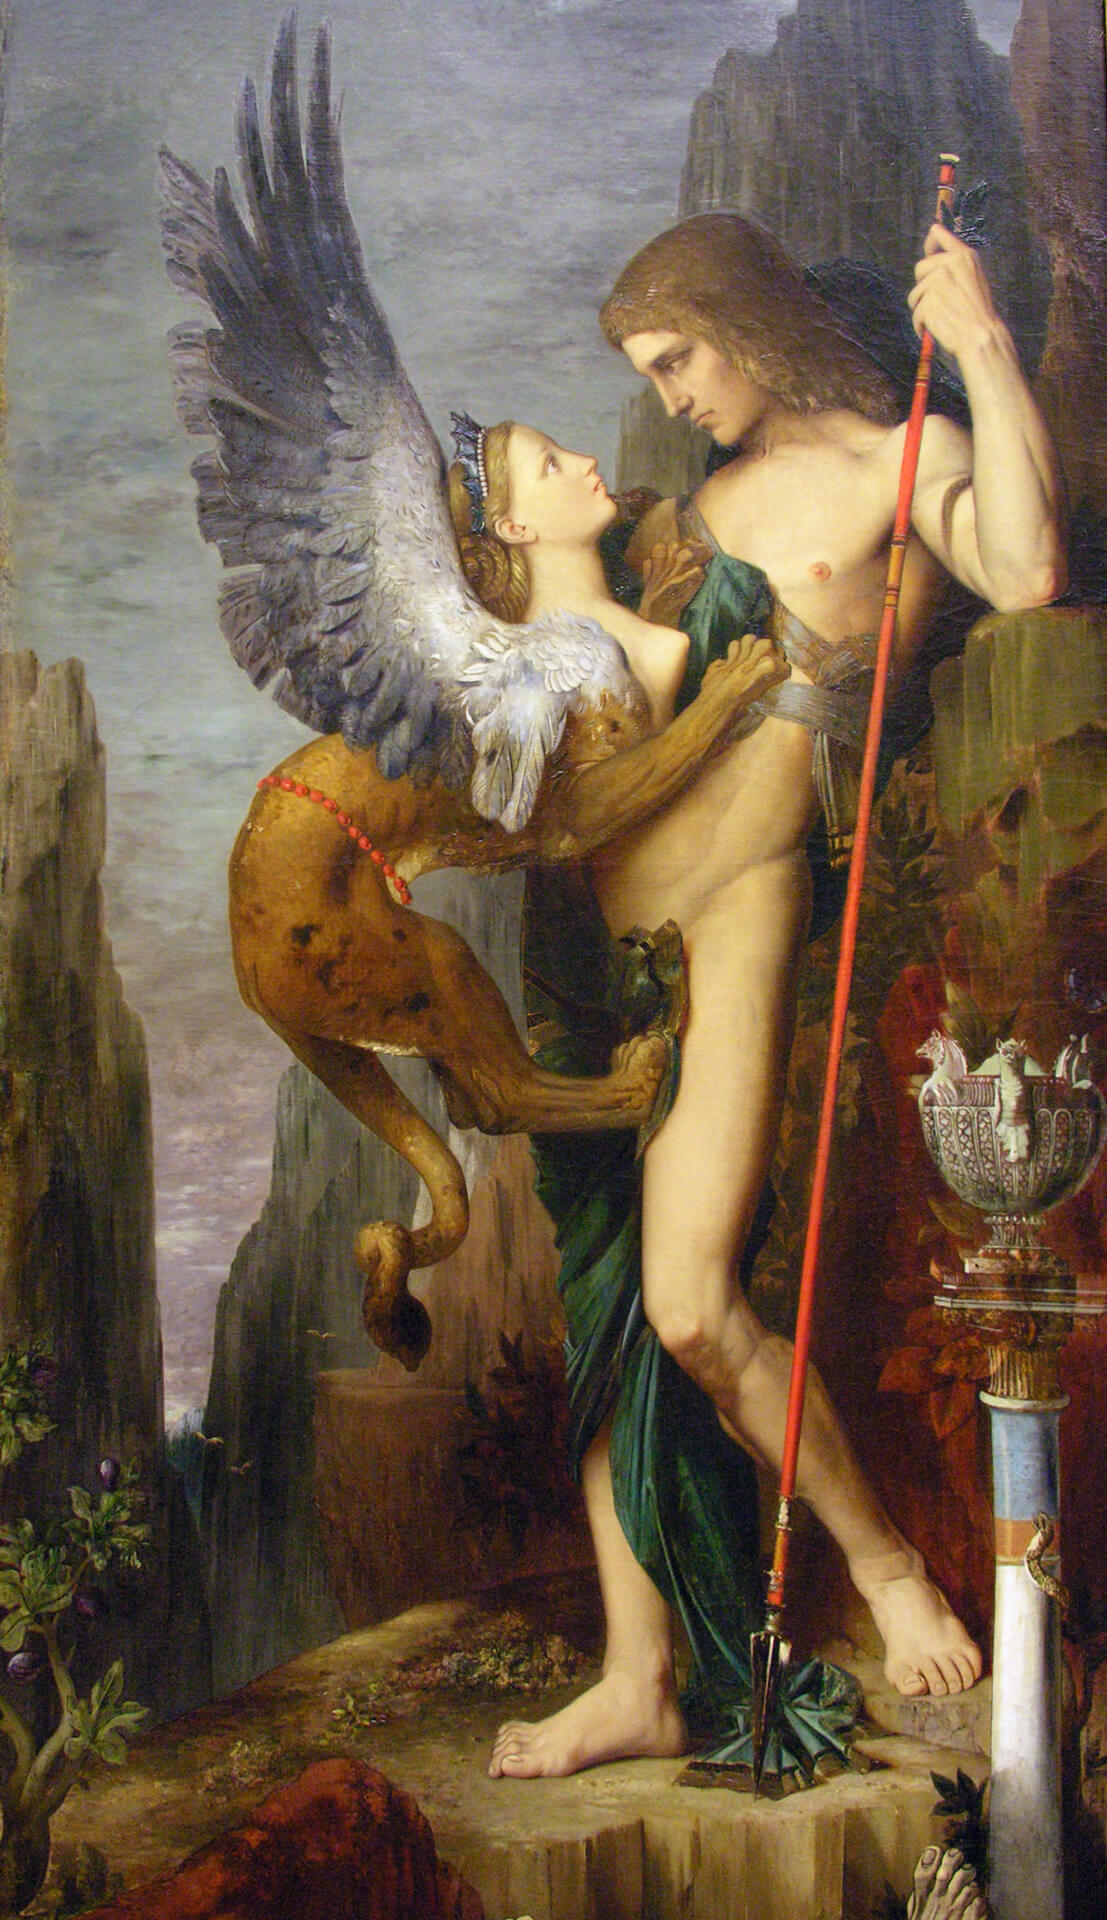 Gustave Moreau: Oedipus and the Sphinx (1864) | Photo by Ed Uthman